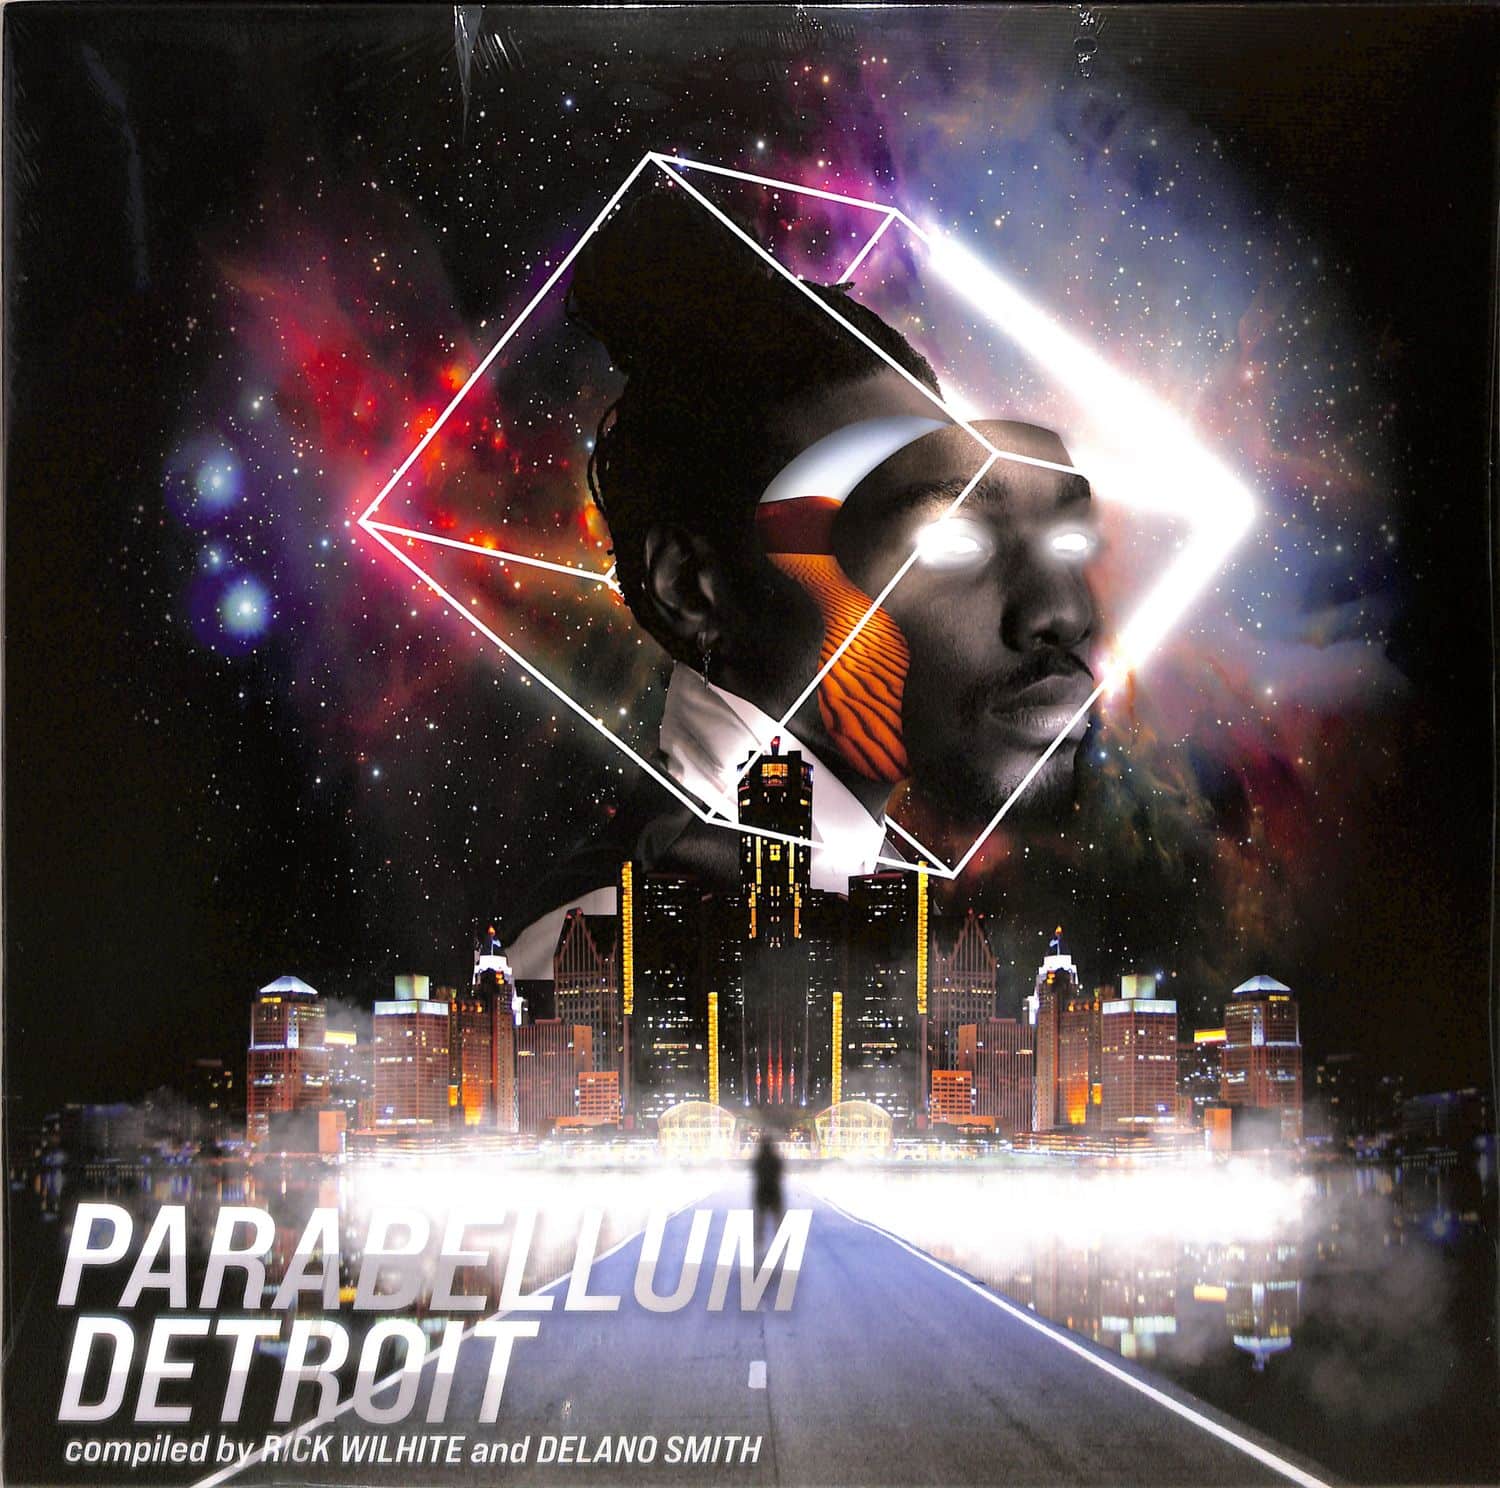 V/A  - PARABELLUM DETROIT, COMPILED BY RICK WILHITE & DELANO SMITH 